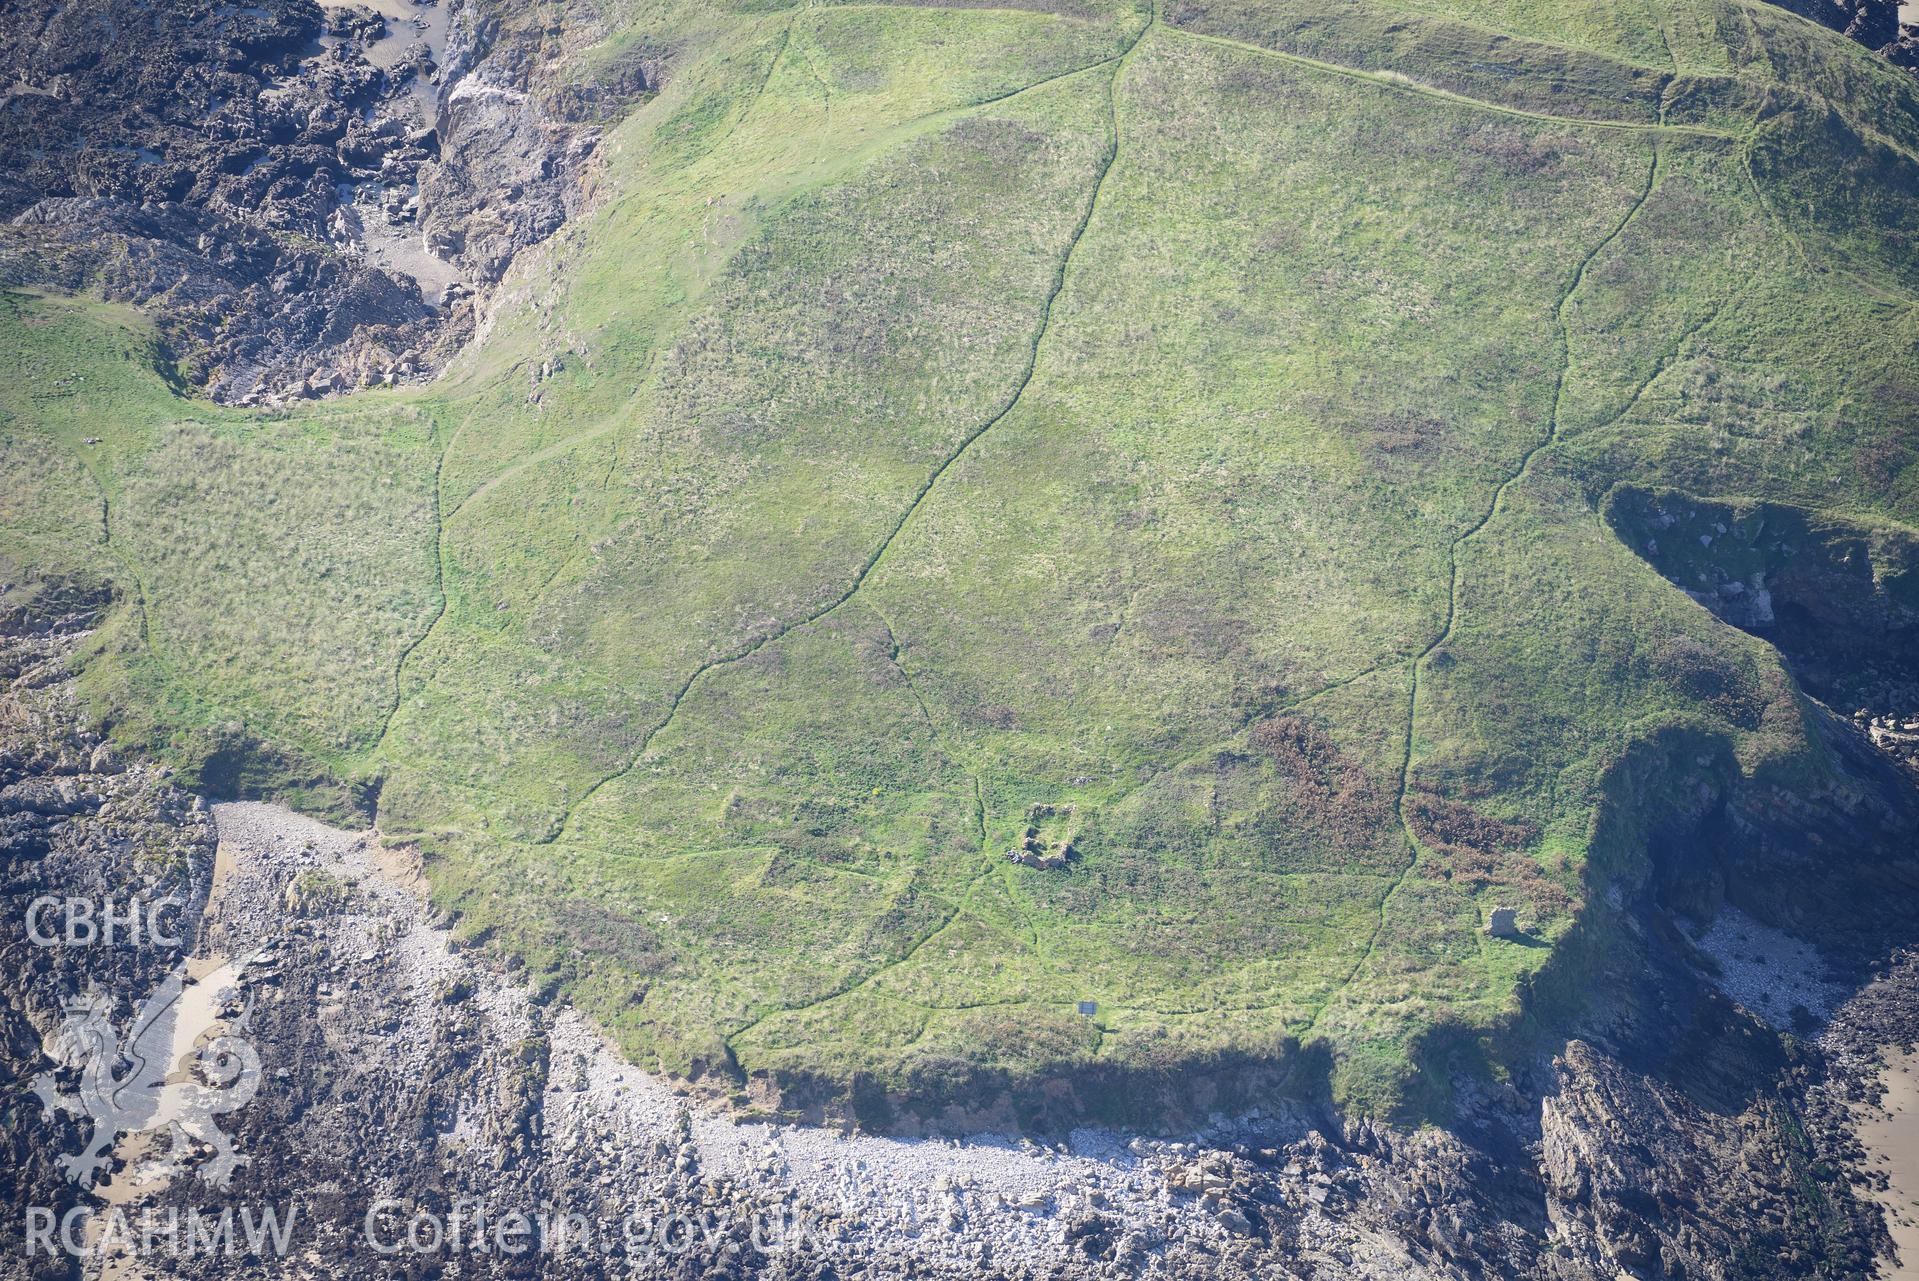 Burry Holms, with its medieval hermitage site, on the western coast of the Gower Peninsula. Oblique aerial photograph taken during the Royal Commission's programme of archaeological aerial reconnaissance by Toby Driver on 30th September 2015.